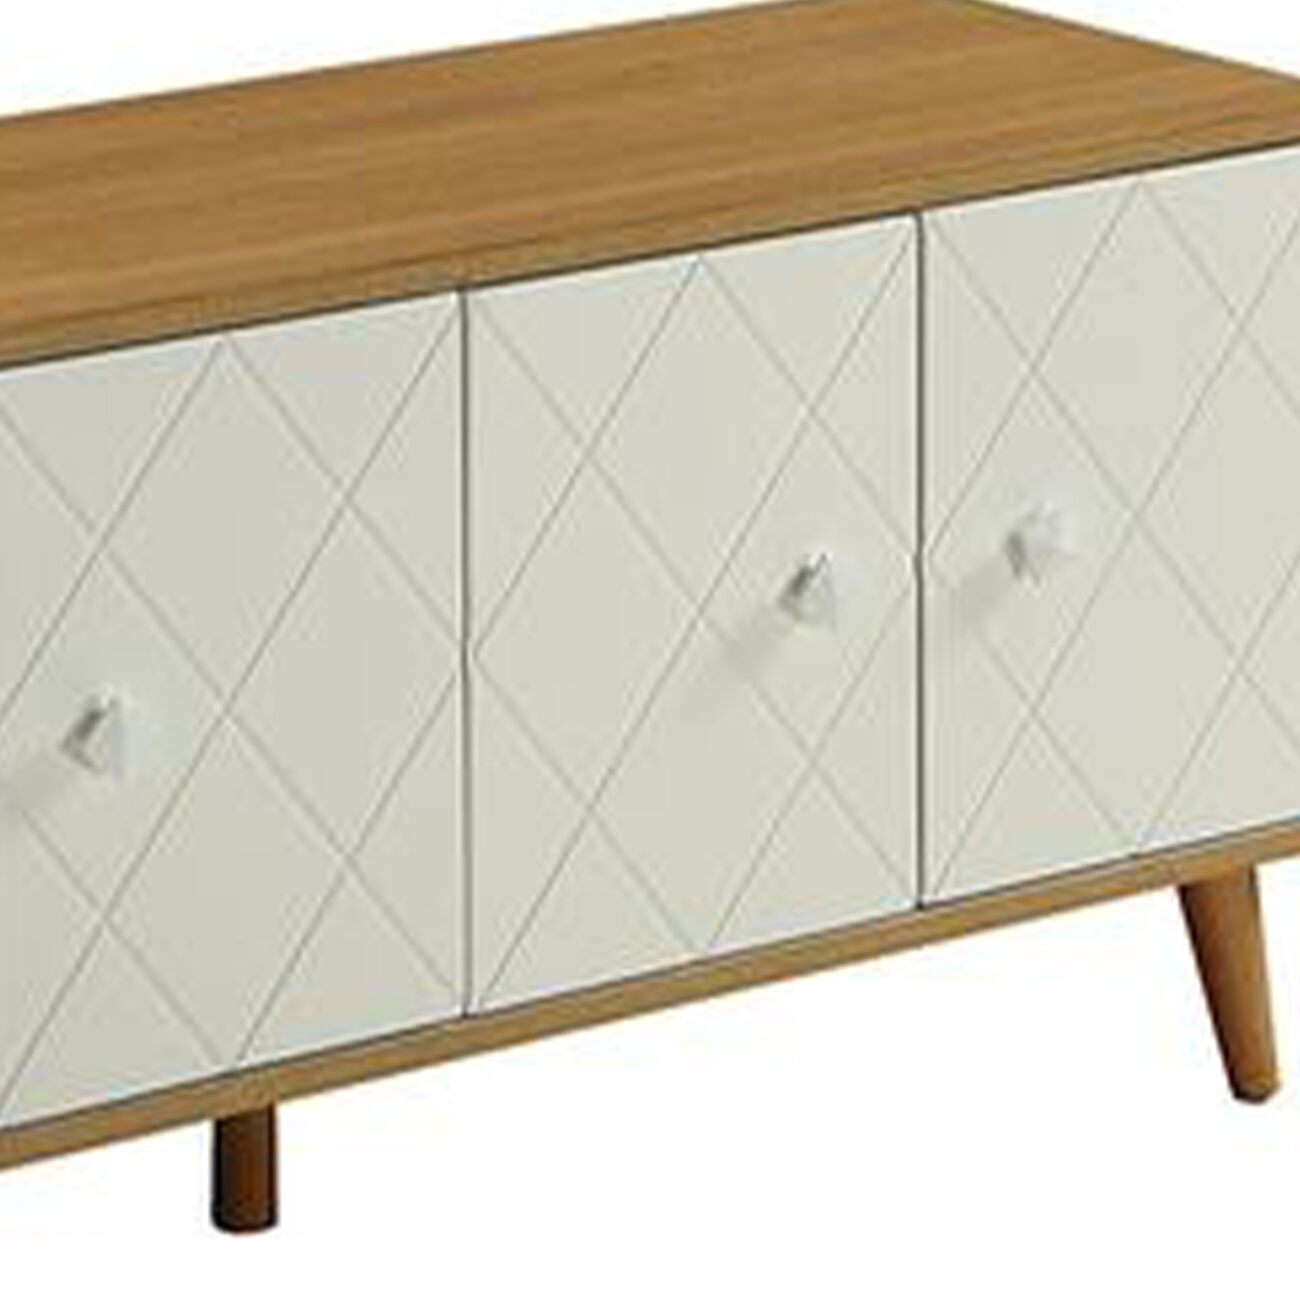 Wooden Console Table with Diamond Grid Patterned Doors, Natural Brown and White